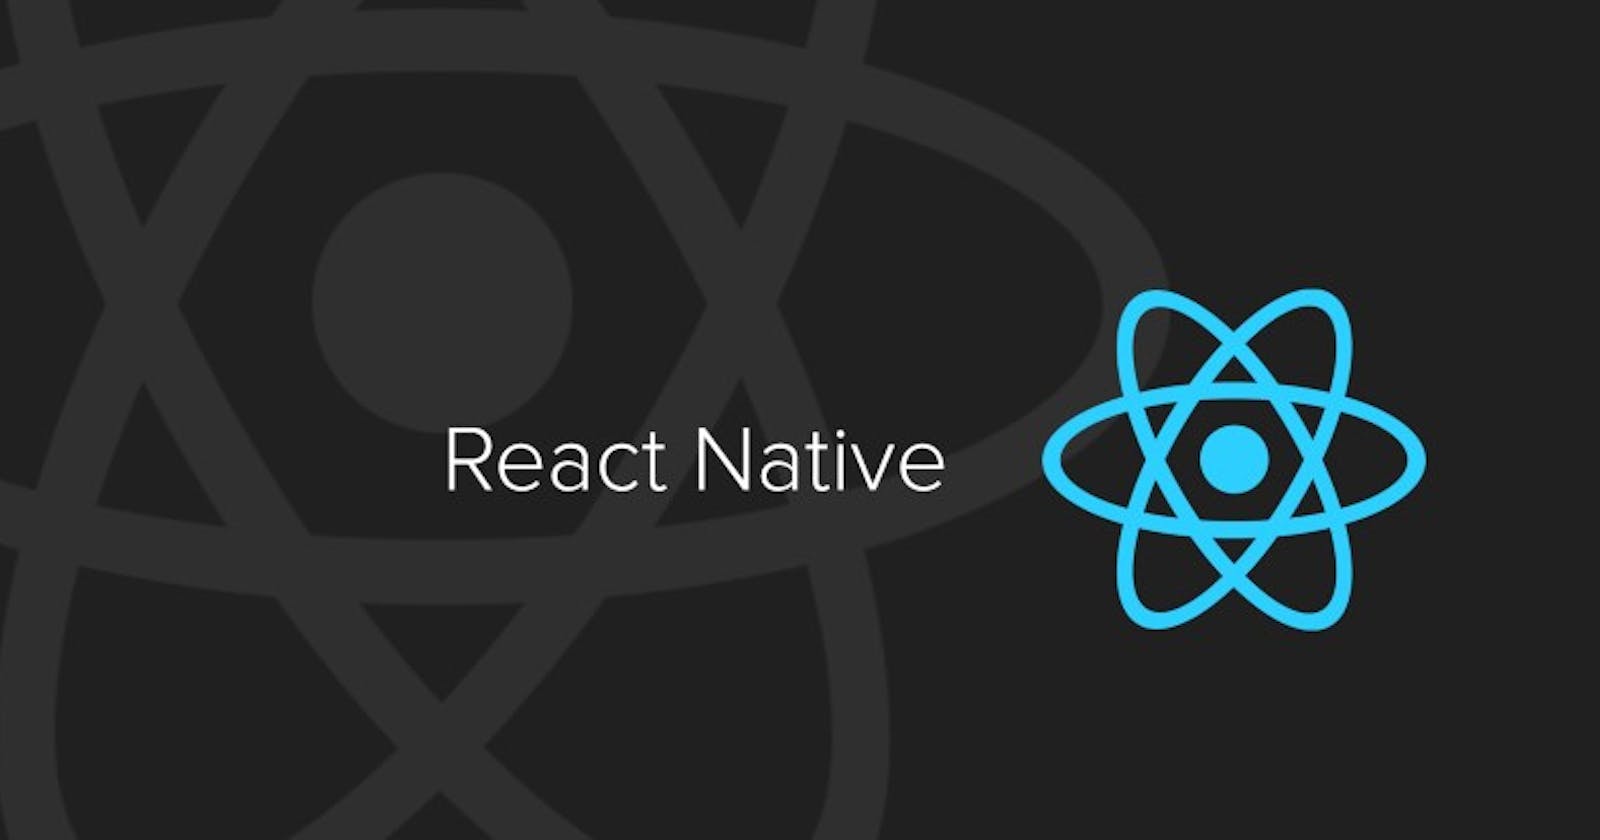 How to use Webview in React Native?